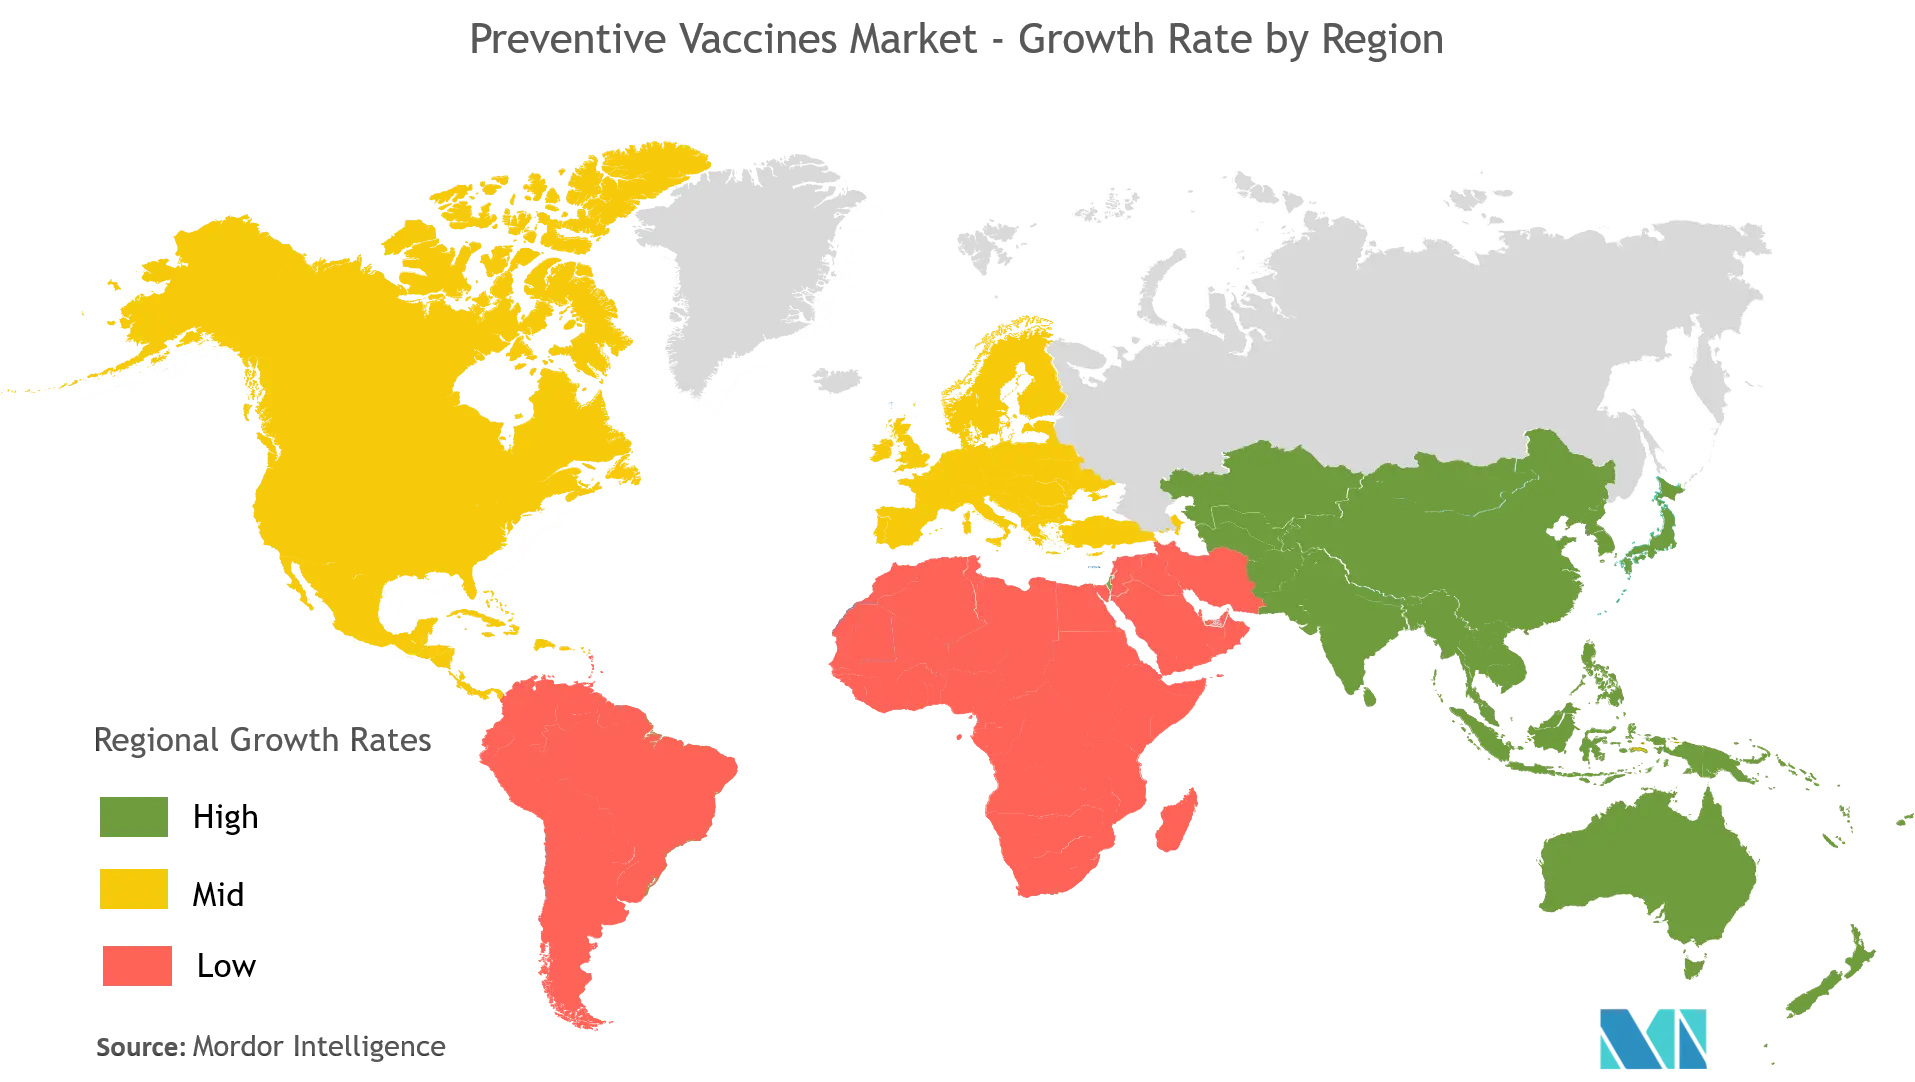 Preventive Vaccines Market Growth Rate